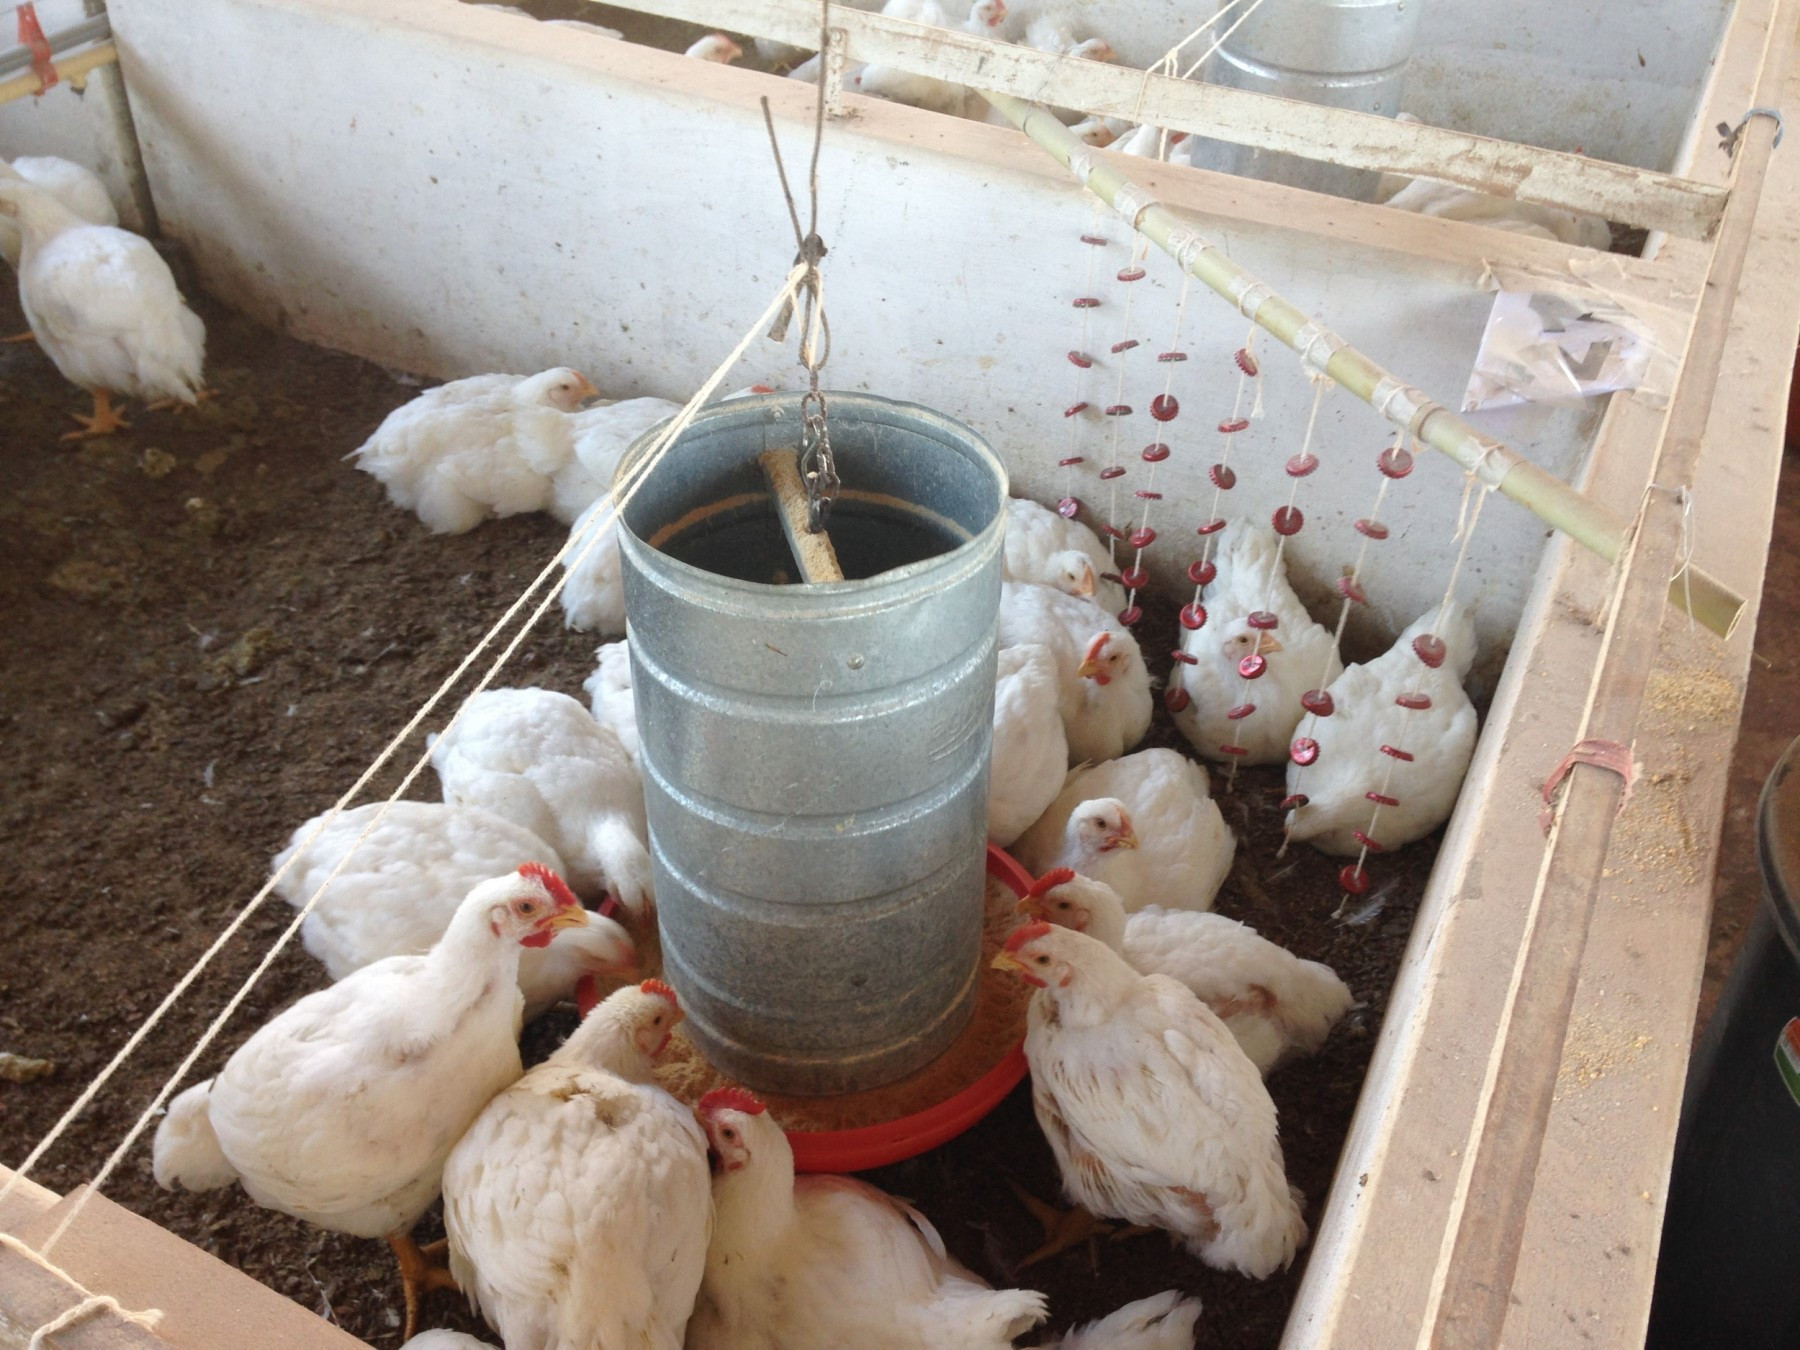 Chickens playing with enrichment at a high welfare farm